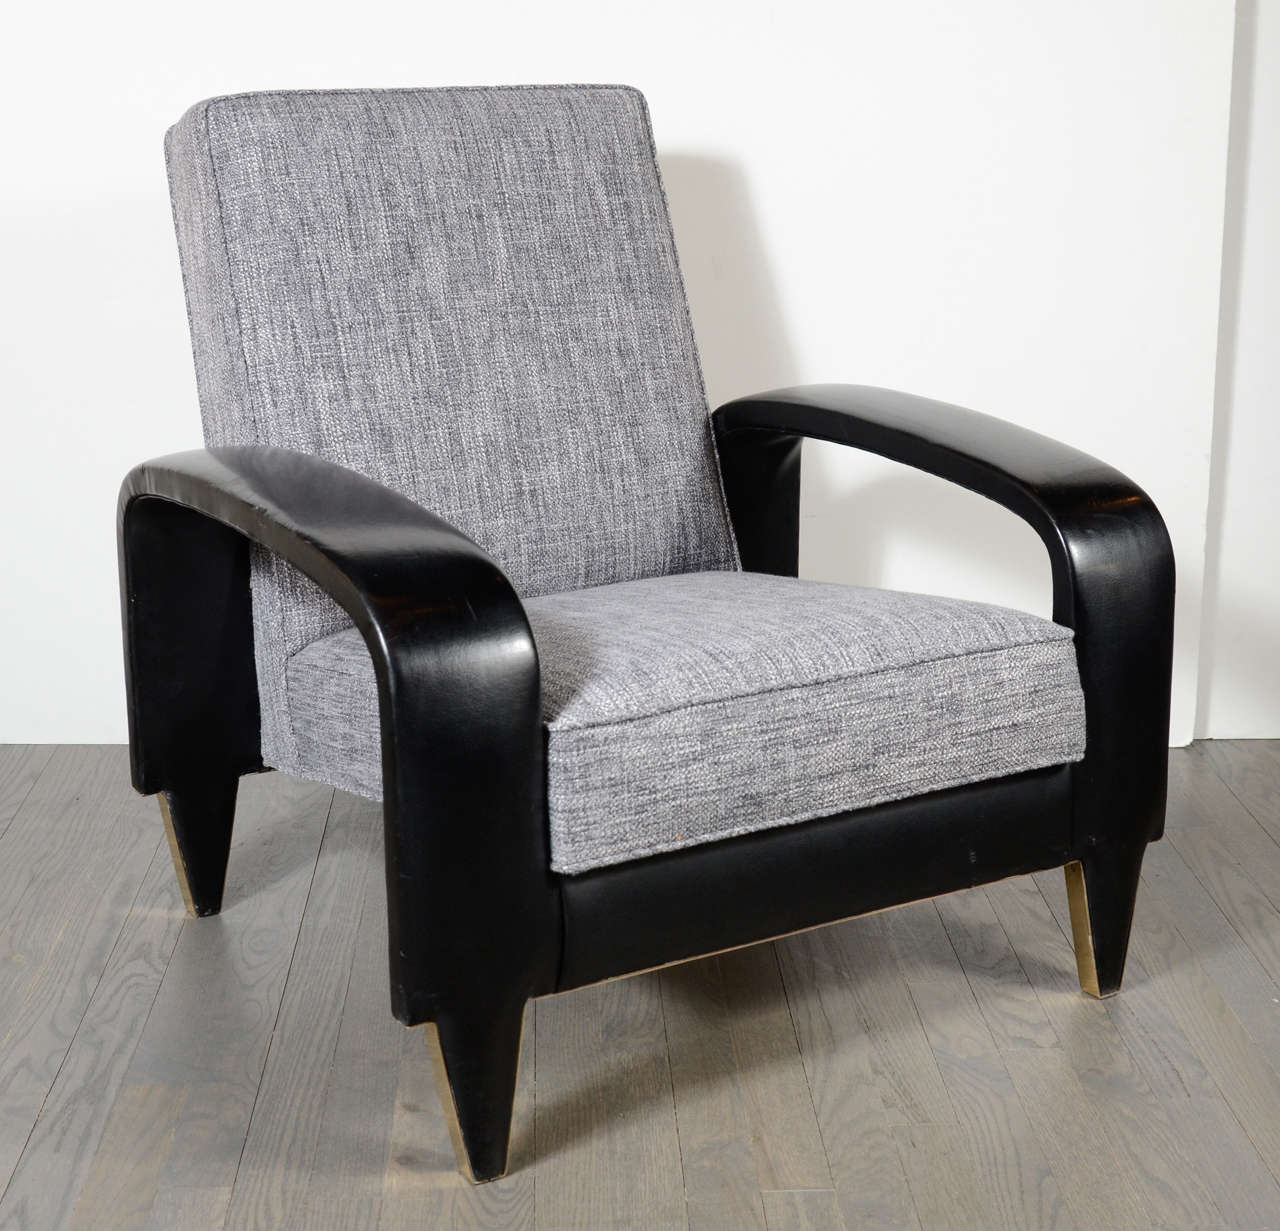 This rare Art Deco club chair features sculptural banded upholstered leather arms and new woven grey and pearl tweed upholstery. It has tapered legs with brush brass details and came from an Italian cruise liner.